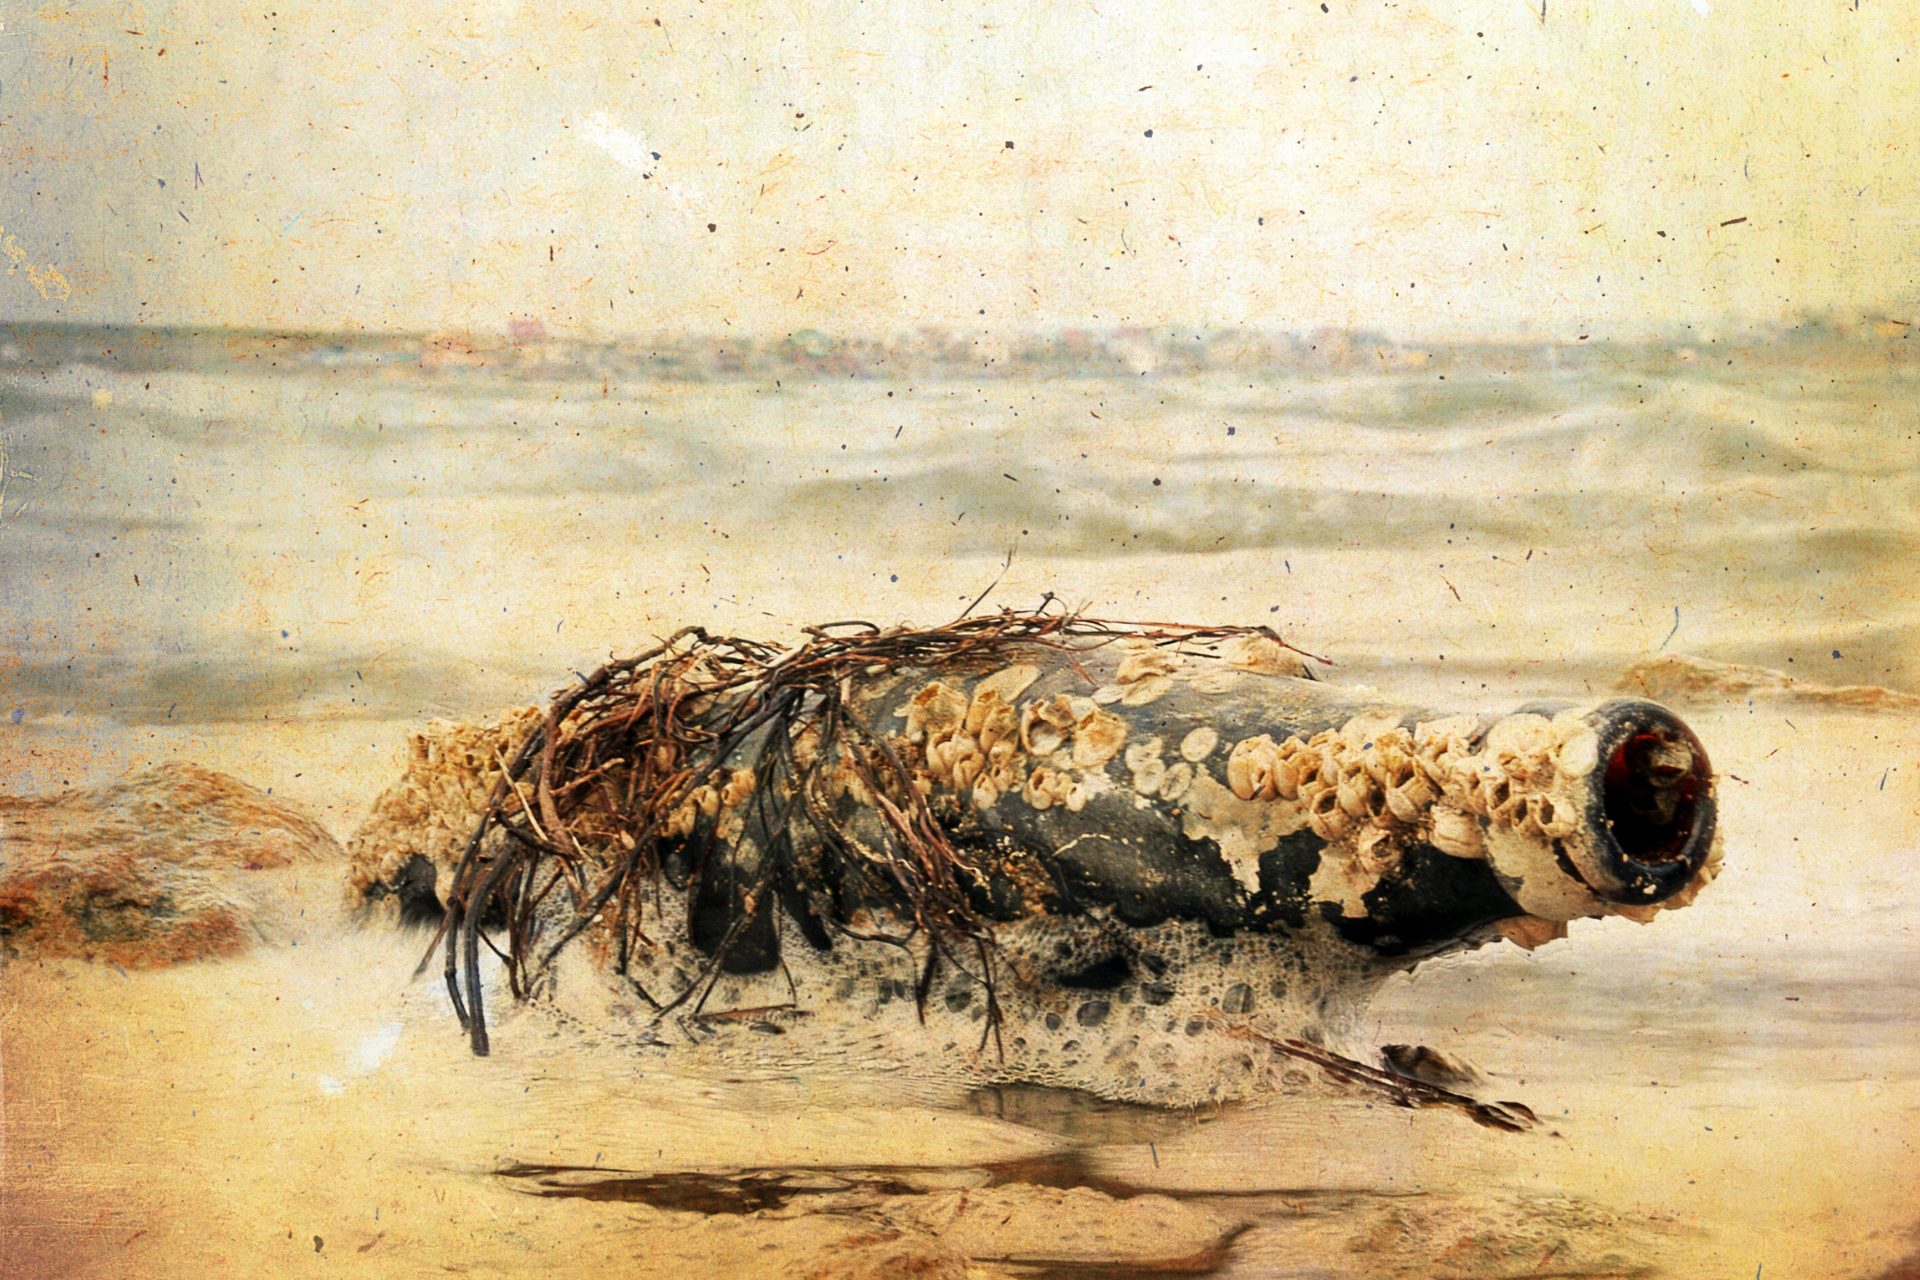 An illustration of an old bottle covered in barnacles and seaweed stuck in the sand on a beach.